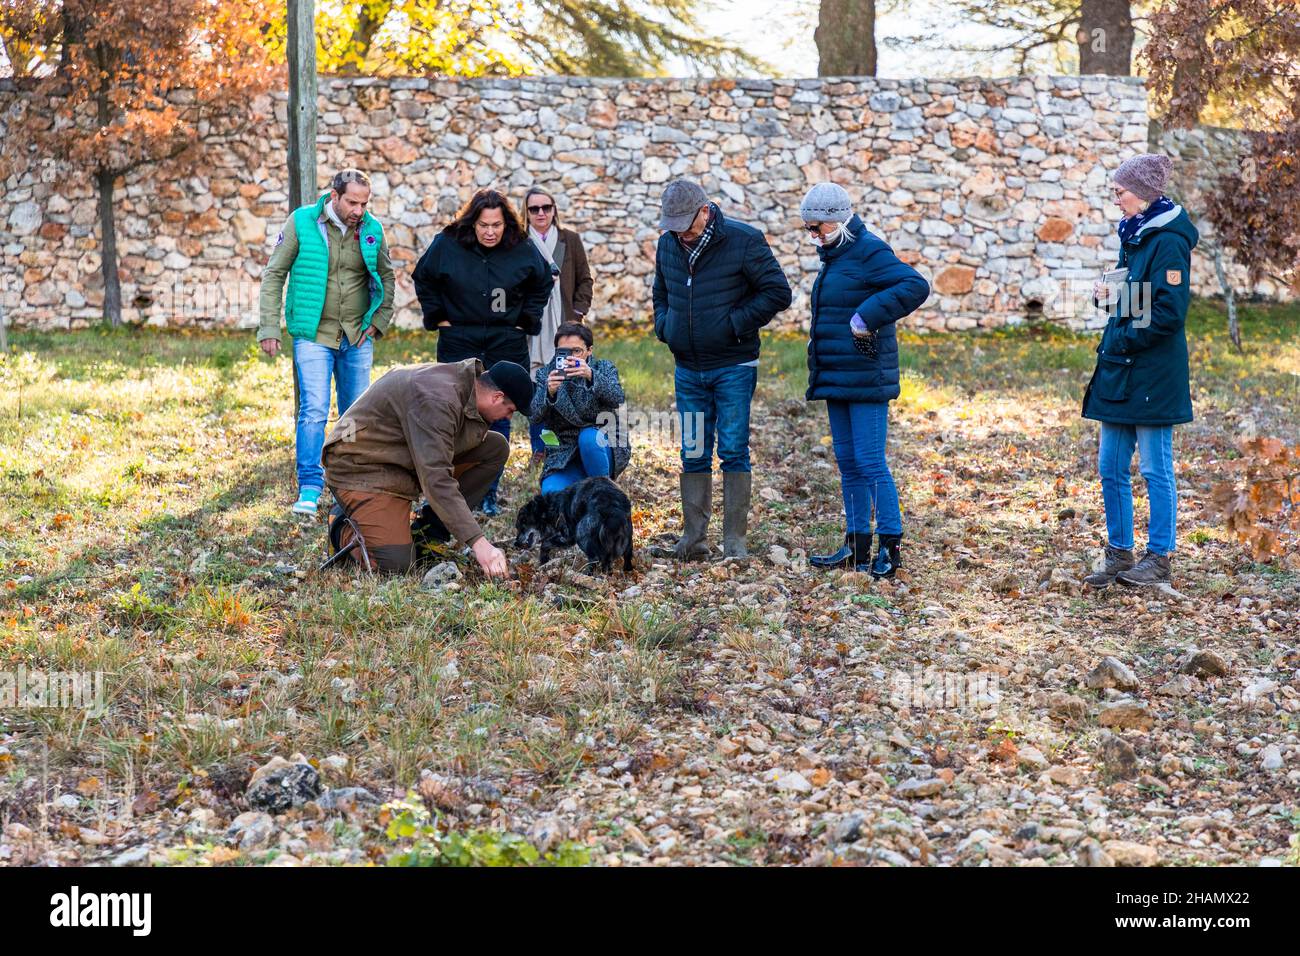 In the Var region, most truffle growers manage private land where they plant oak trees and inoculate the roots of the tree with the fungal spores. At the Domaine de Majastre in Bauduen (Var province), truffle foraging with sniffer dogs is also taught to tourists. Bauduen, France Stock Photo